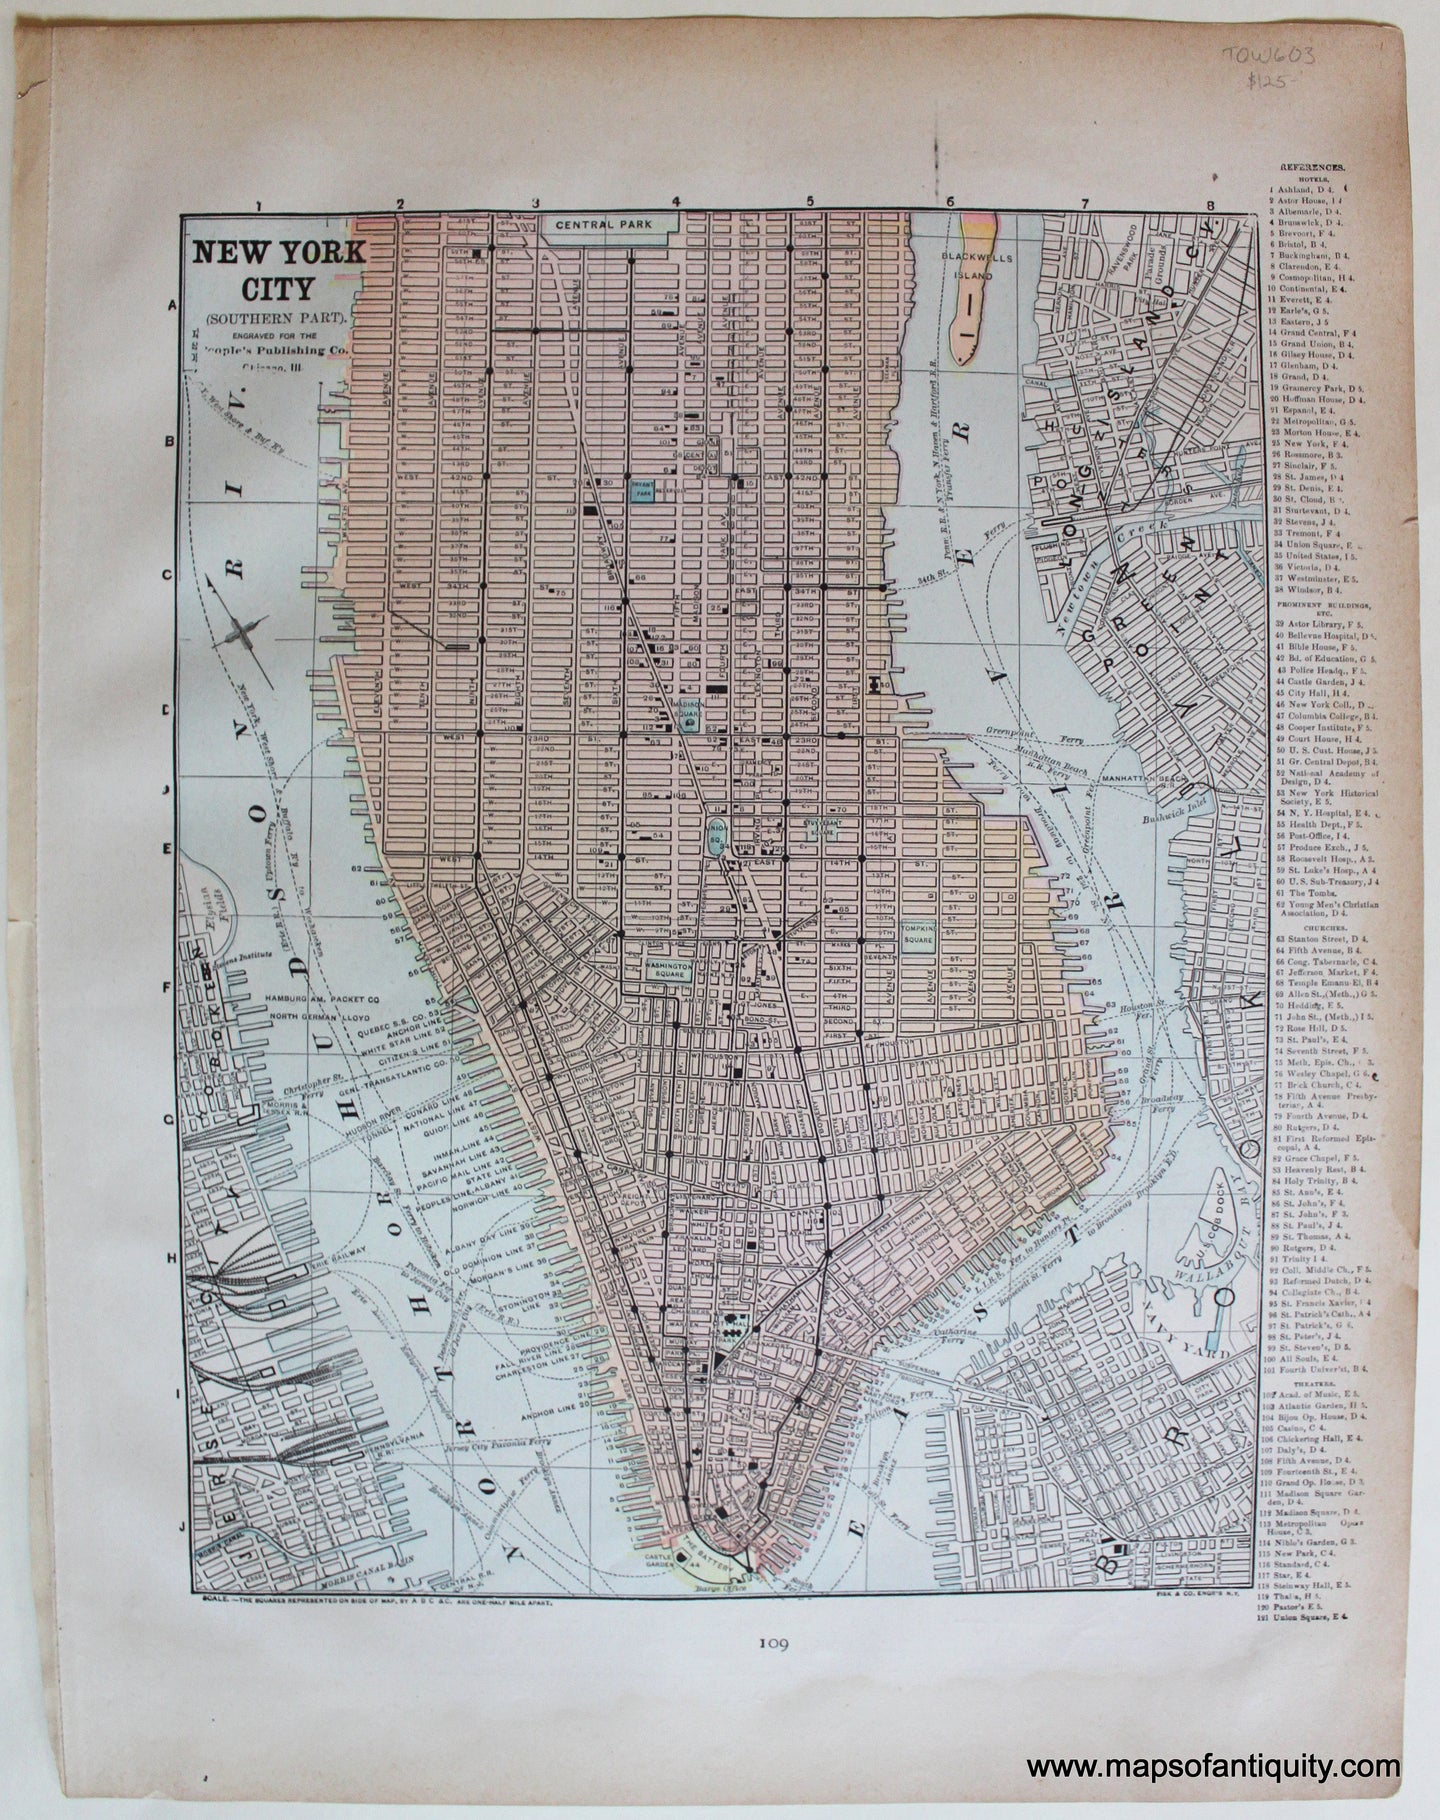 Antique-Printed-Color-Map-New-York-City-(Southern-Part)-Verso:-Brooklyn-c.-1890-People's-Publishing-Co.-New-York-City-1800s-19th-century-Maps-of-Antiquity